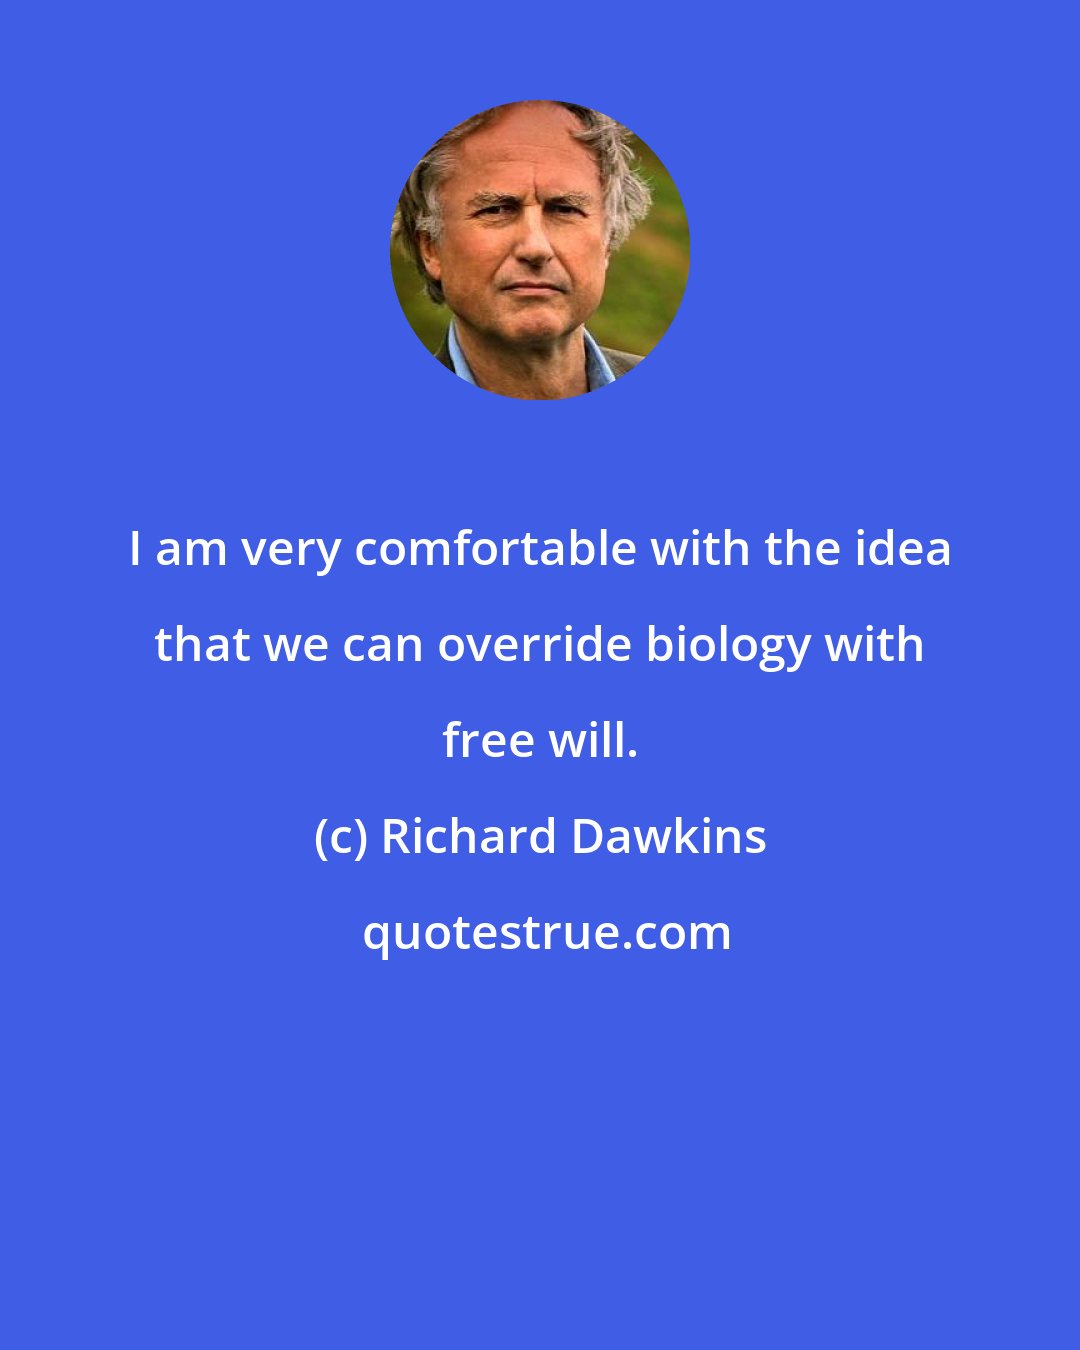 Richard Dawkins: I am very comfortable with the idea that we can override biology with free will.